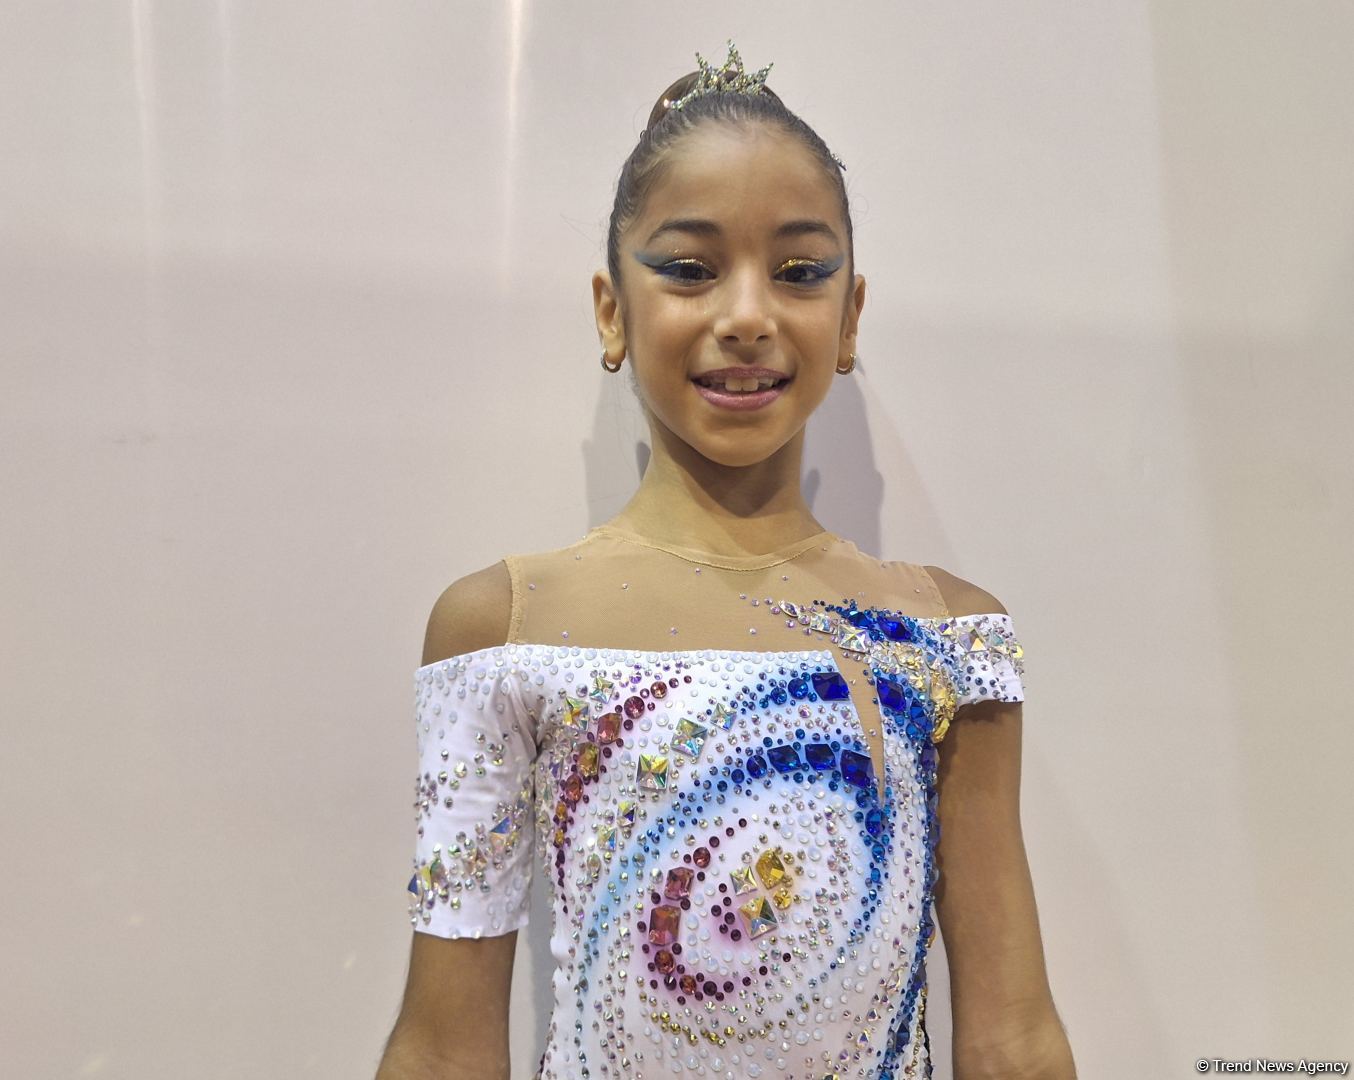 Young Azerbaijani athlete shares dream of achieving great success in rhythmic gymnastics